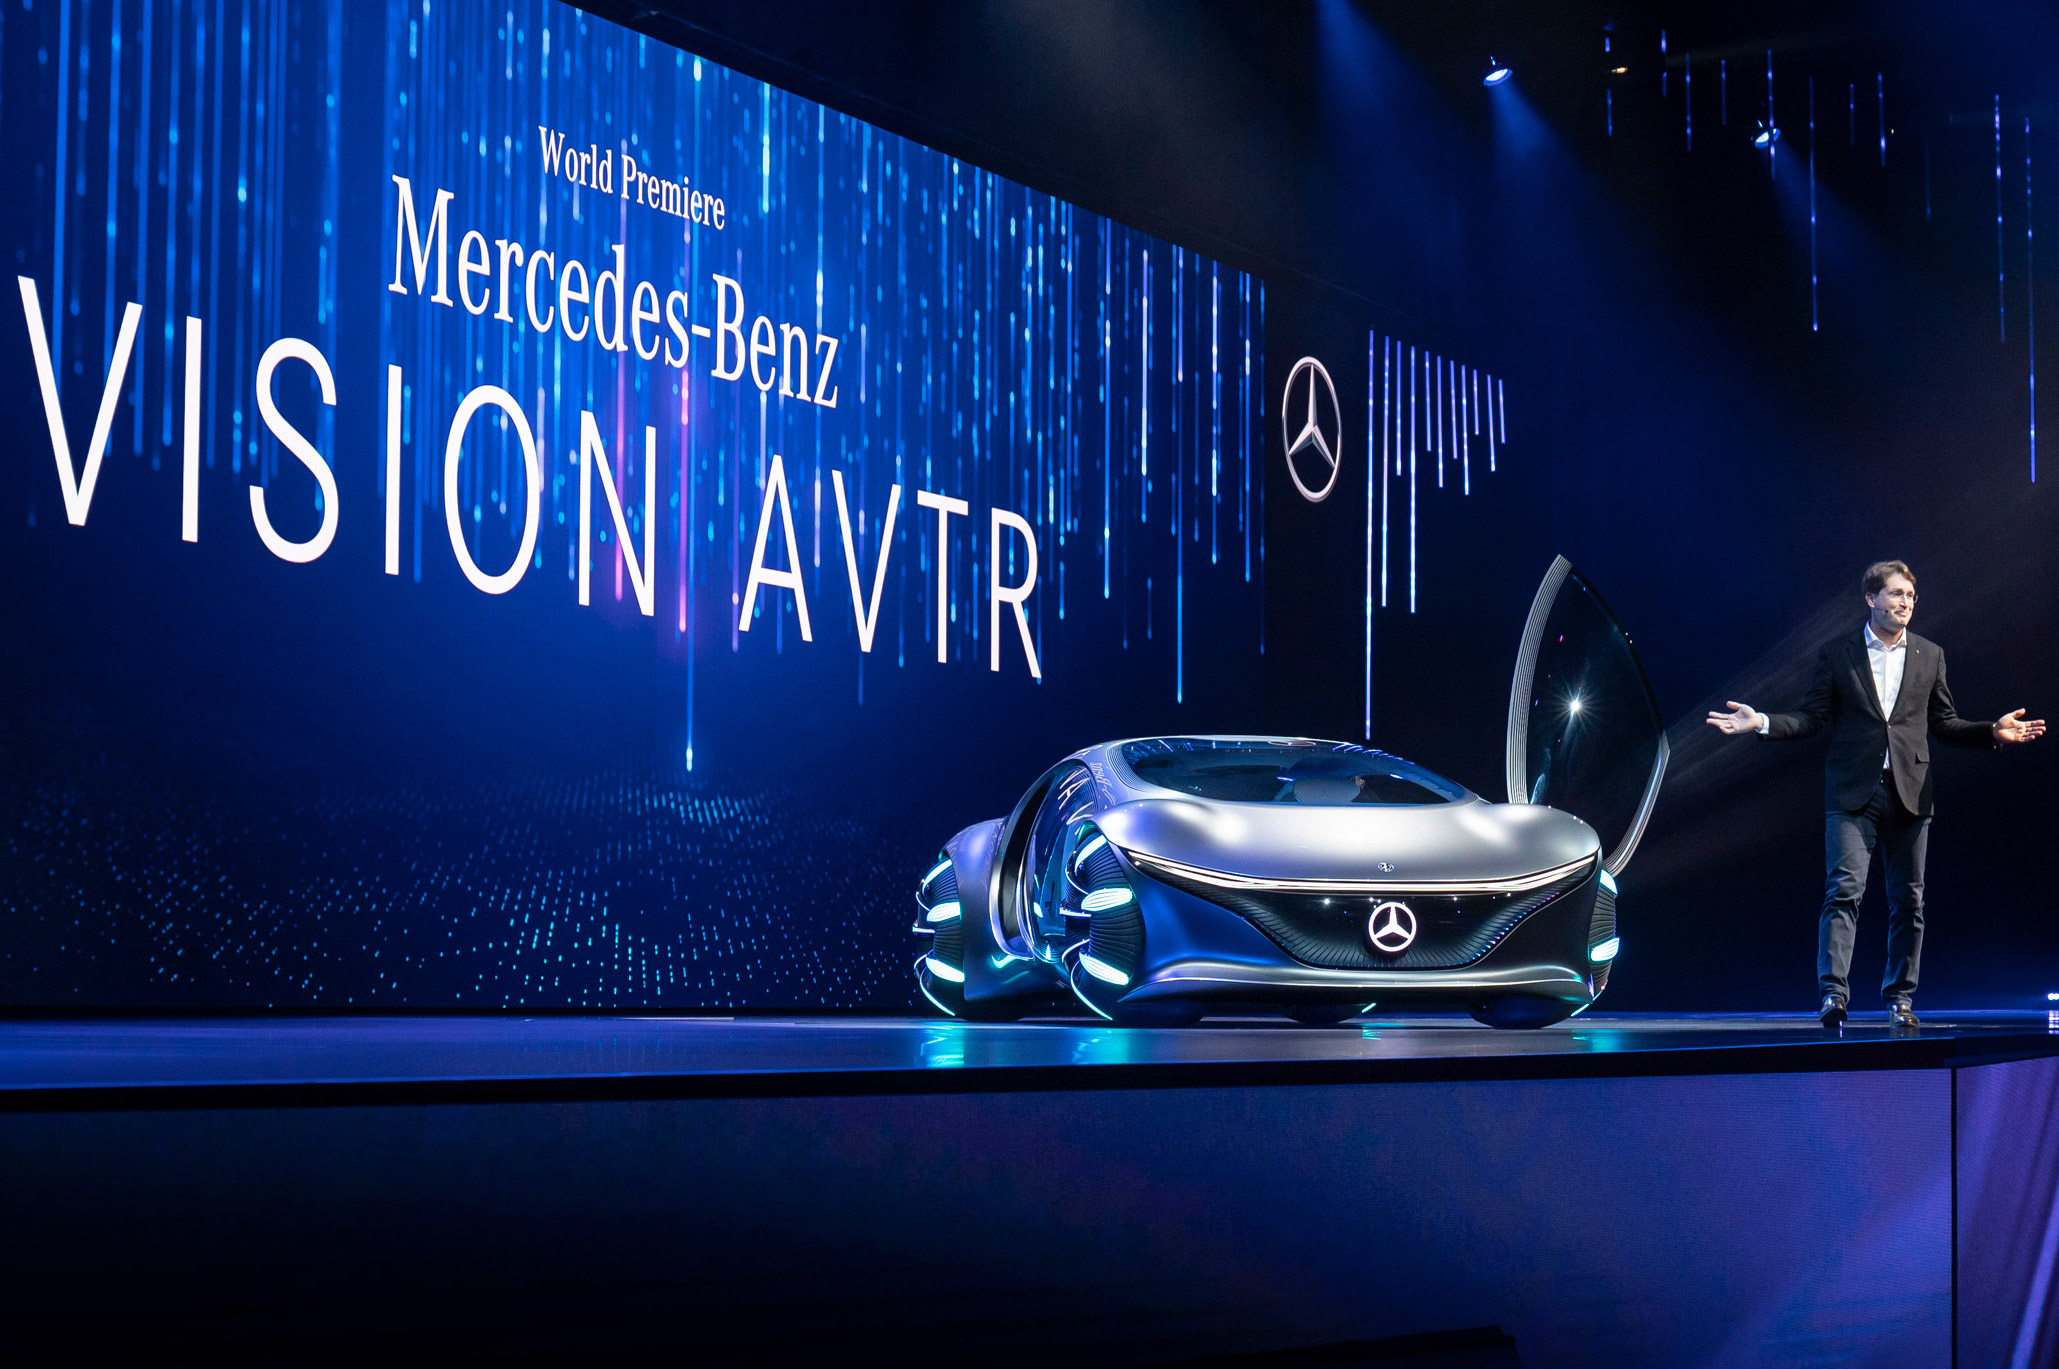 Check out MercedesBenzs Avatarinpired Concept at CES  The Car Guide